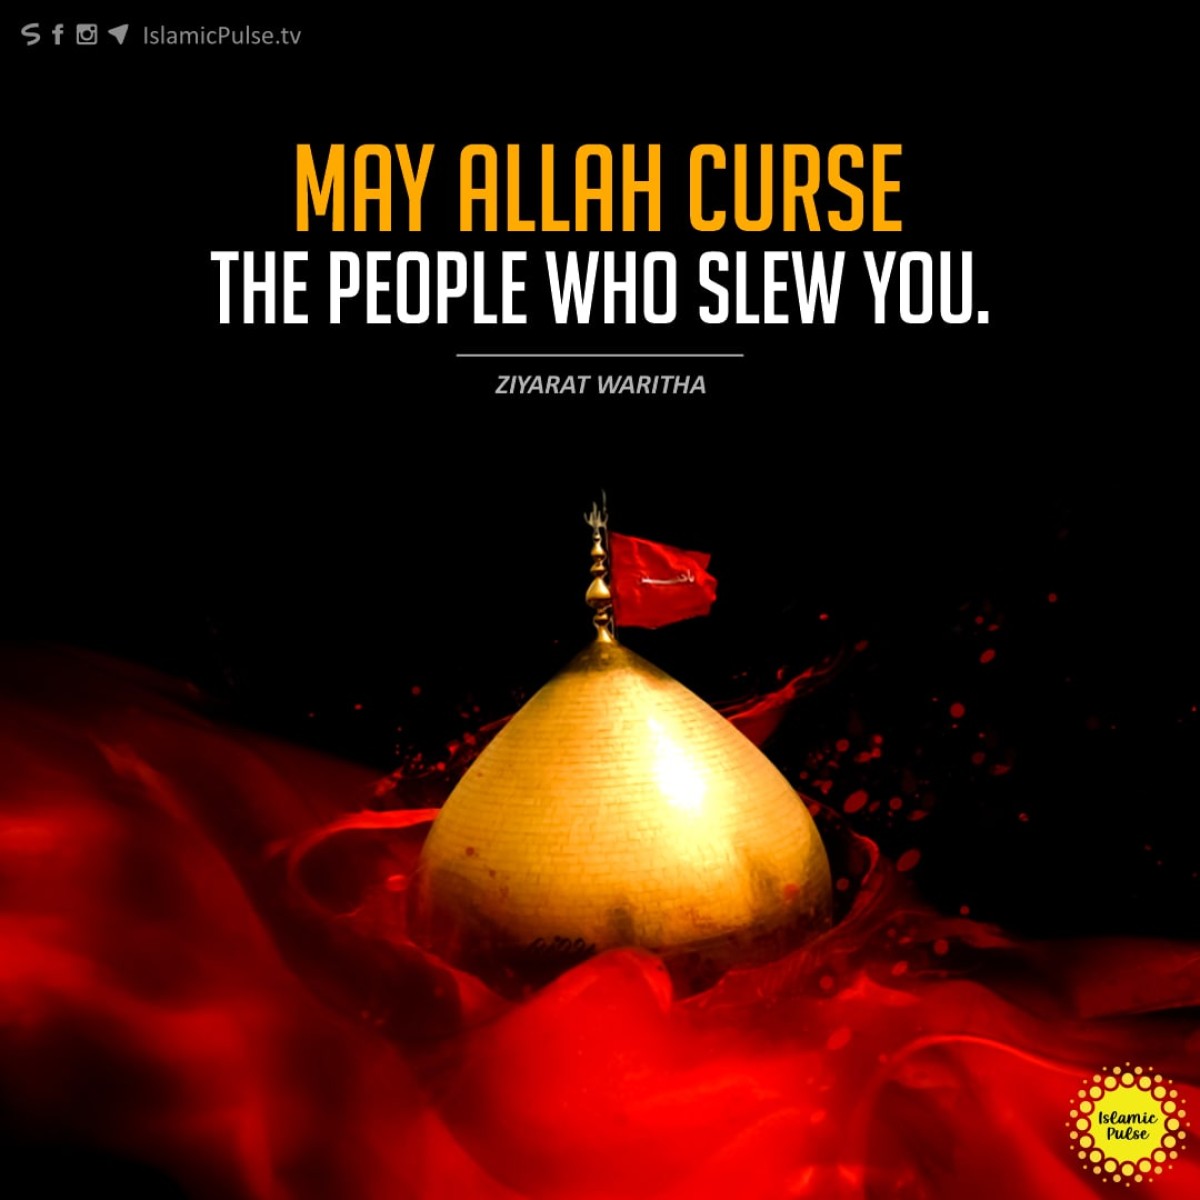 "May Allah curse the people who slew you."